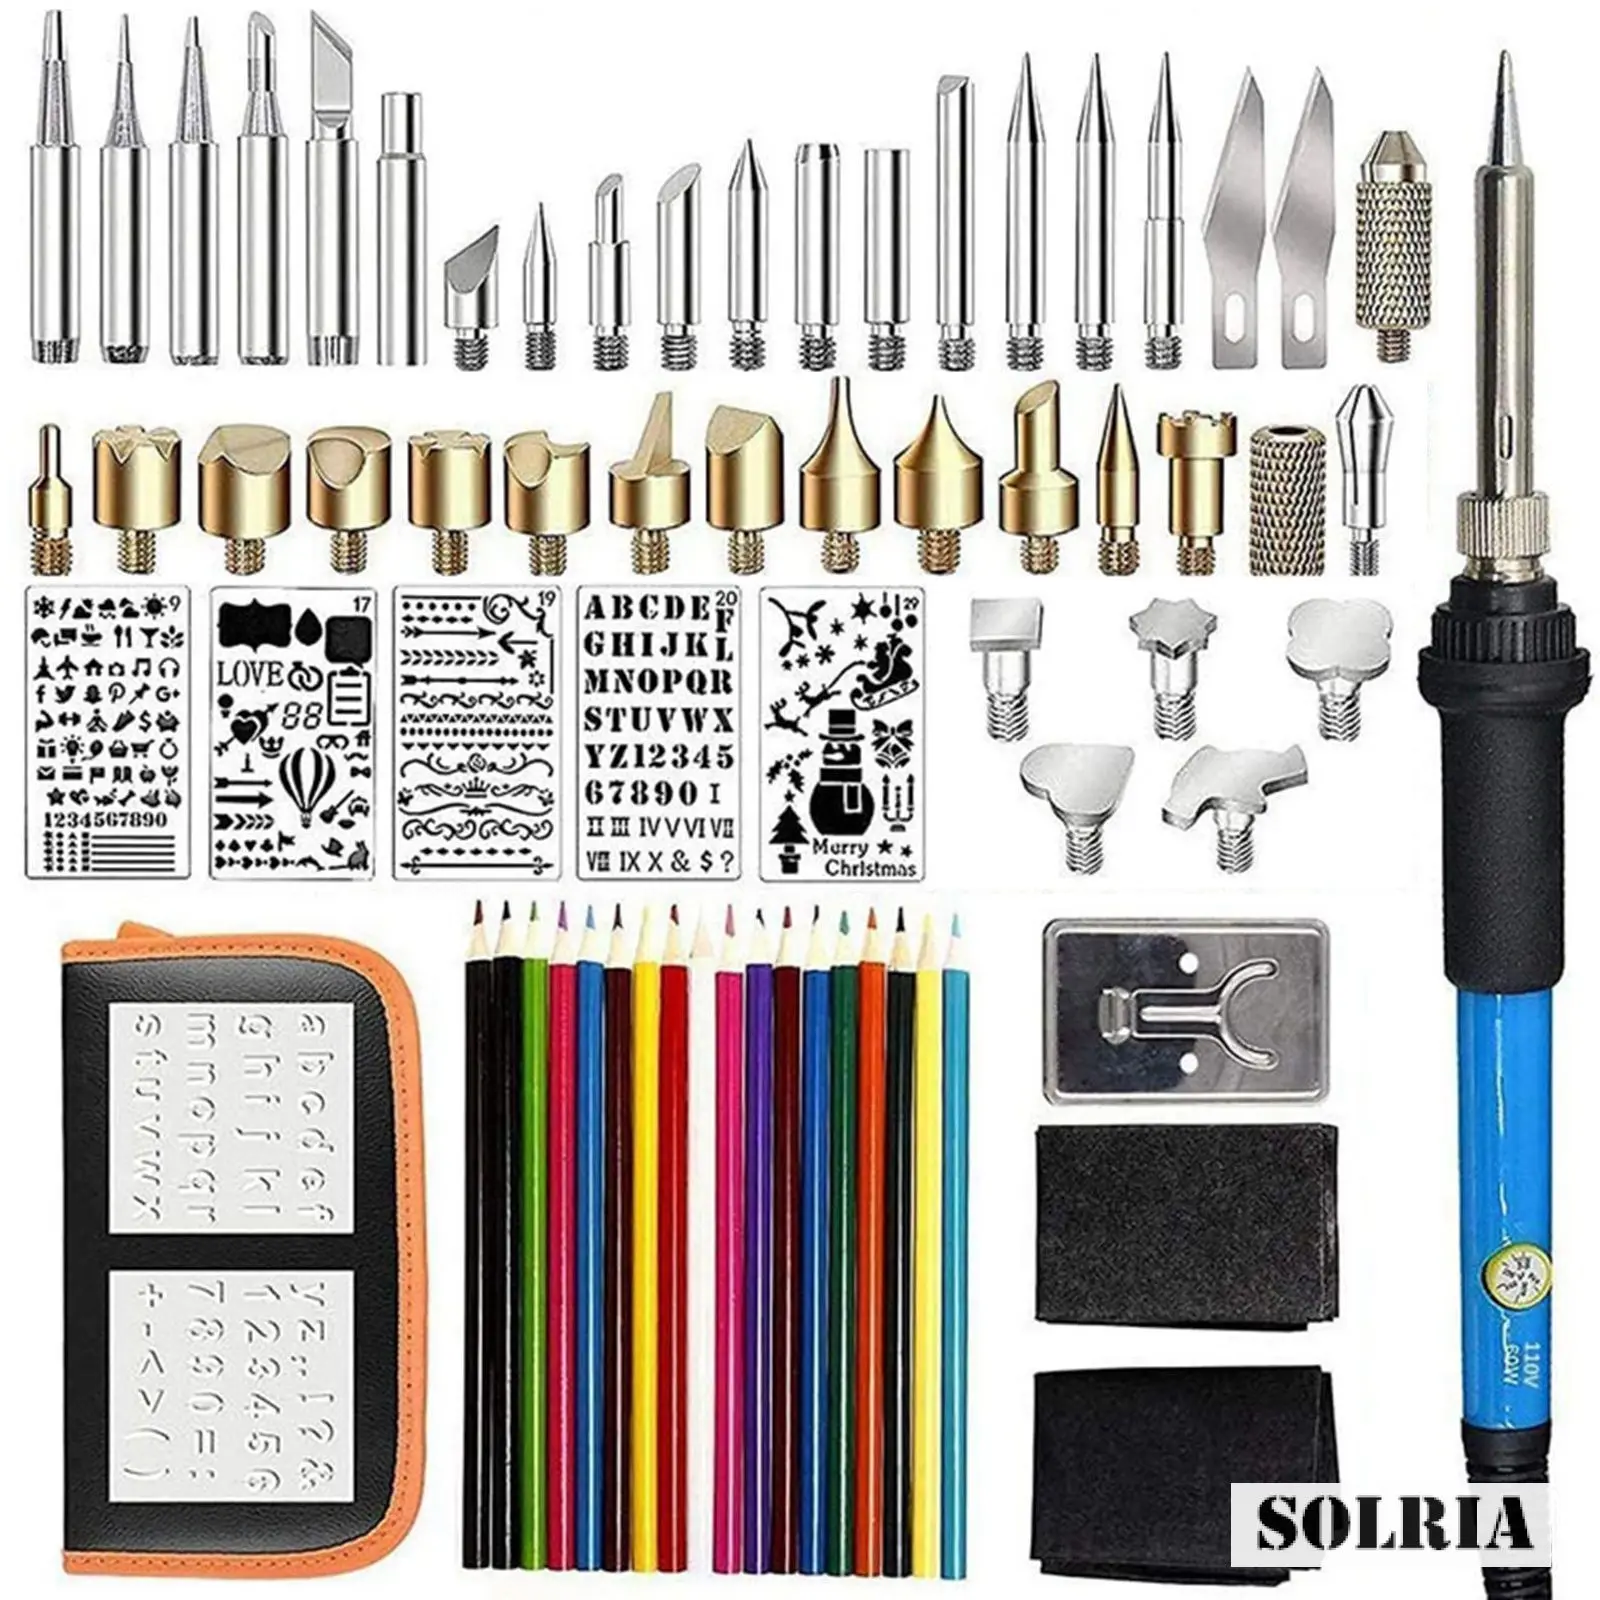 

71 Sets of Engraving Pyrography Set Iron Kits 60W Thermostat Electric Iron Heat Transfer with 18 Kinds of Colored Pens Safety